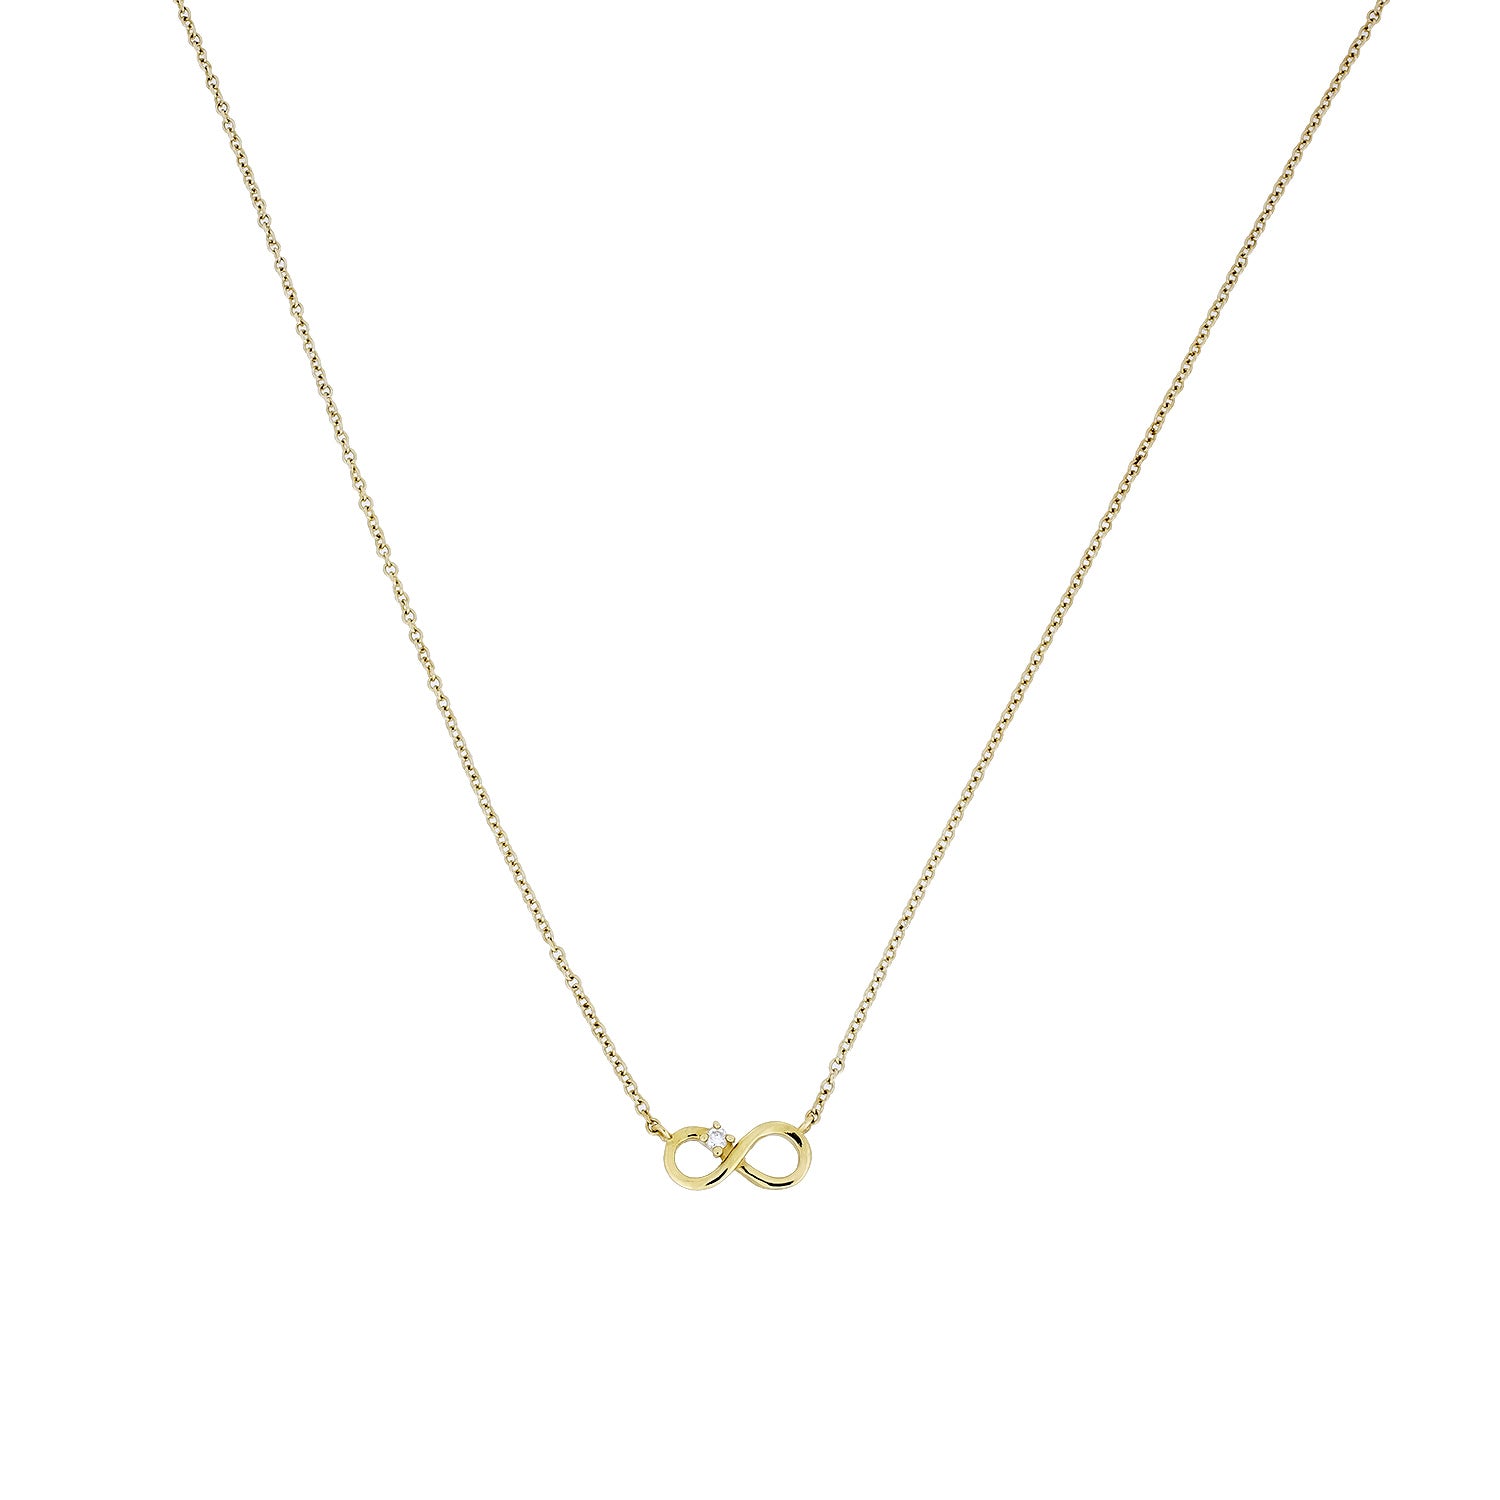 9 Carat Yellow Gold and Diamond Infinity Necklace